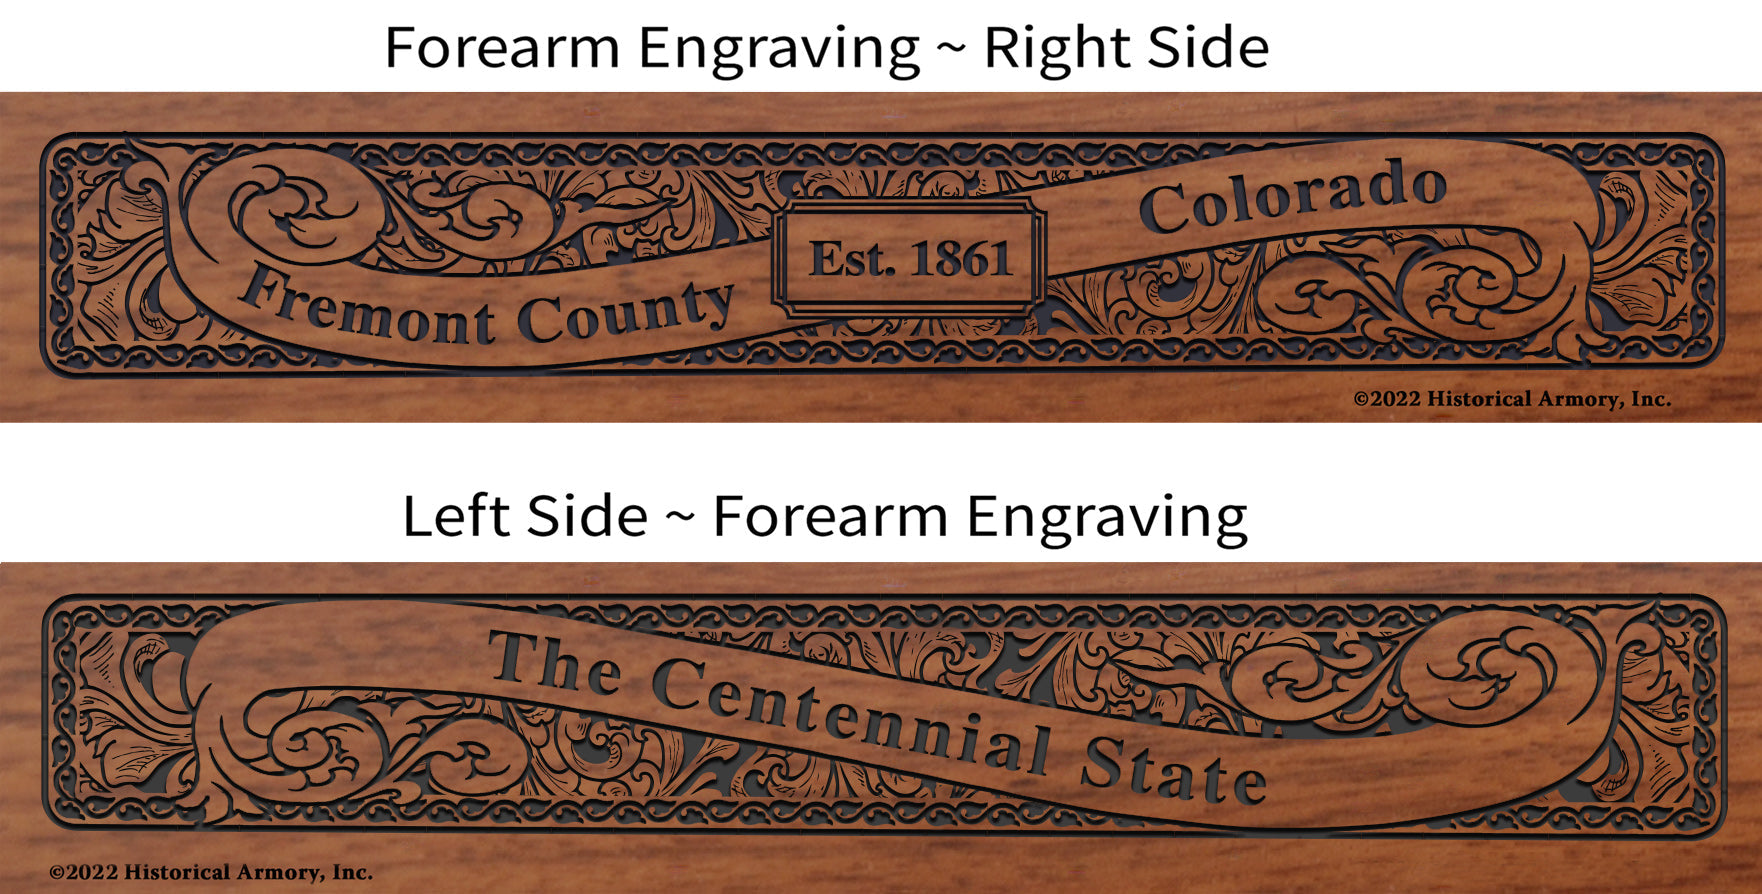 Fremont County Colorado Engraved Rifle Forearm